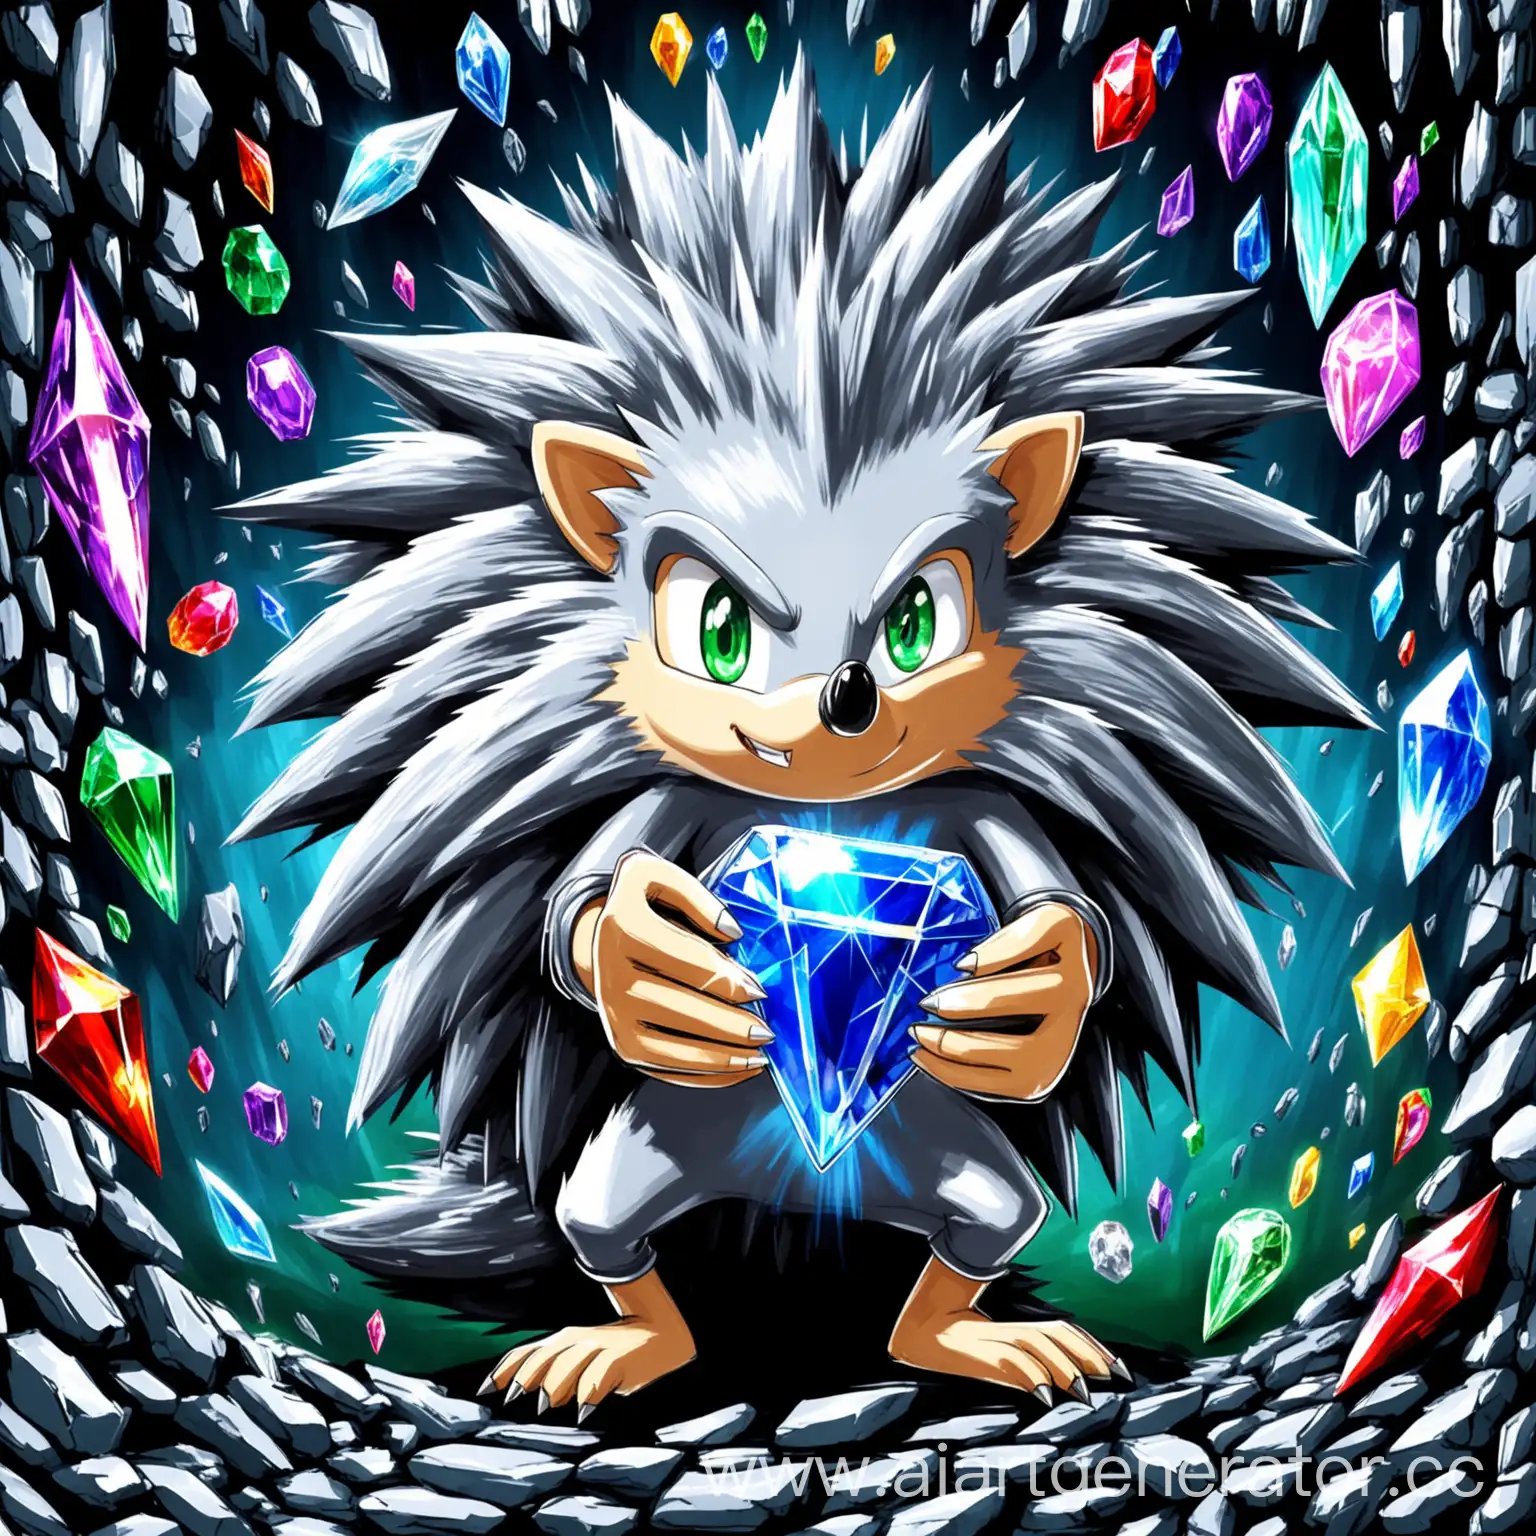 silver the hedhehog holds out the Chaos Emerald